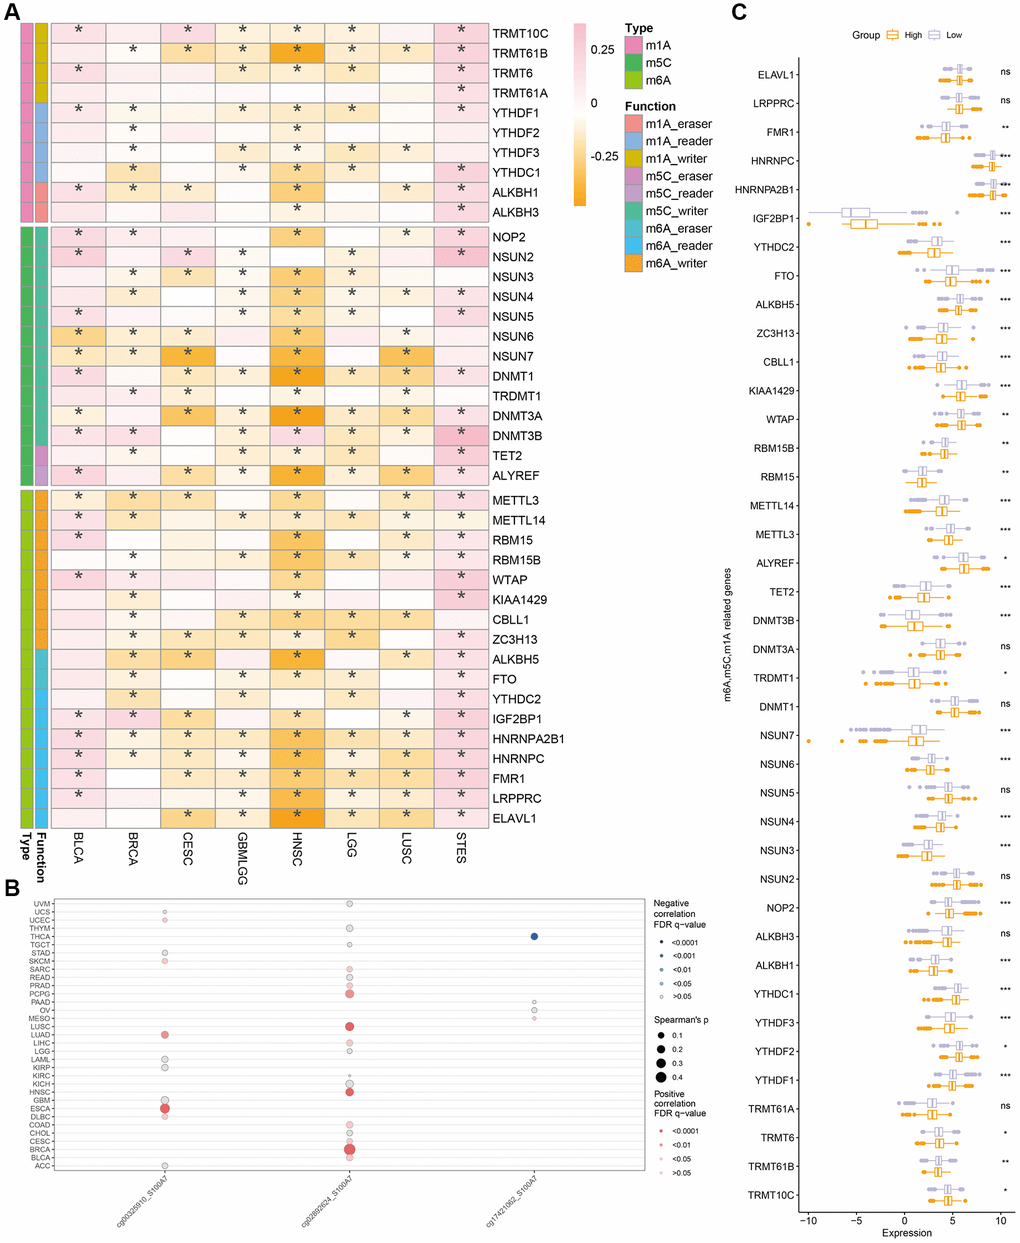 Correlation between methylation and S100A7 expression pan-cancer. (A) Correlation between S100A7 expression and m6A, m5C, and m1A pan-cancer. (B) Correlation between DNA methylation and S100A7 expression pan-cancer. (C) The expression of genes related to m6A, m5C, and m1A in the two groups based on the median S100A7 expression in breast cancer. “ns” represents not significant. *P **P ***P 6-methyladenosine; m1A: N1-methyladenosine; m5C: 5-methylcytosine.